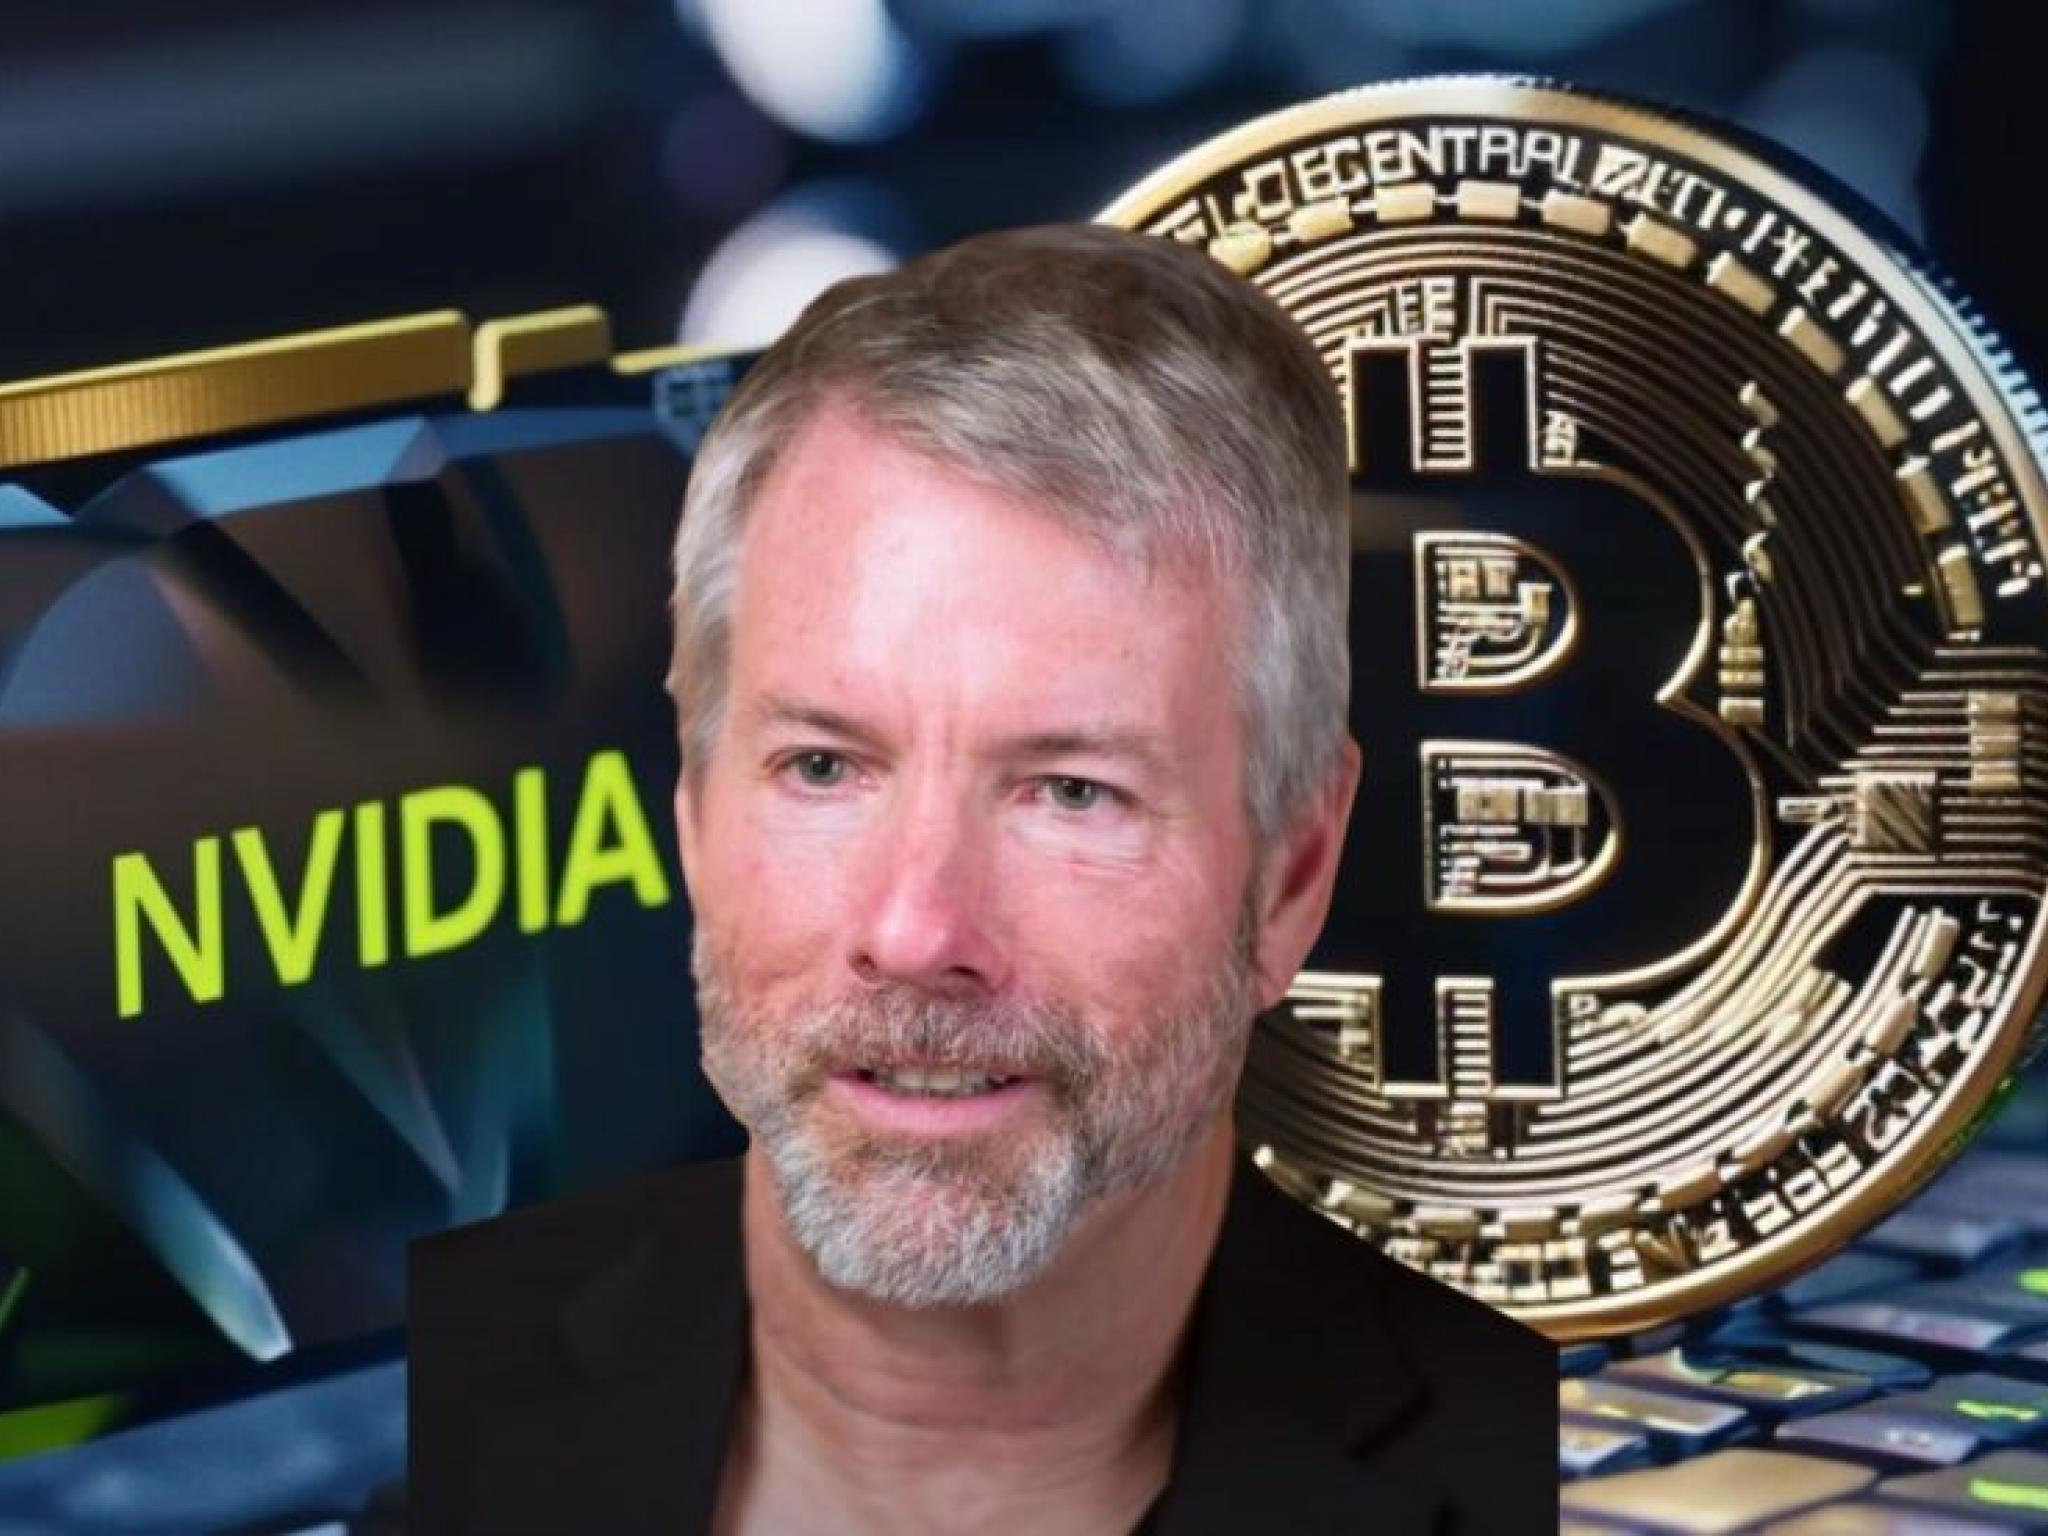  missed-out-on-nvidia-michael-saylor-says-get-on-the-bitcoin-standard-for-even-better-returns 